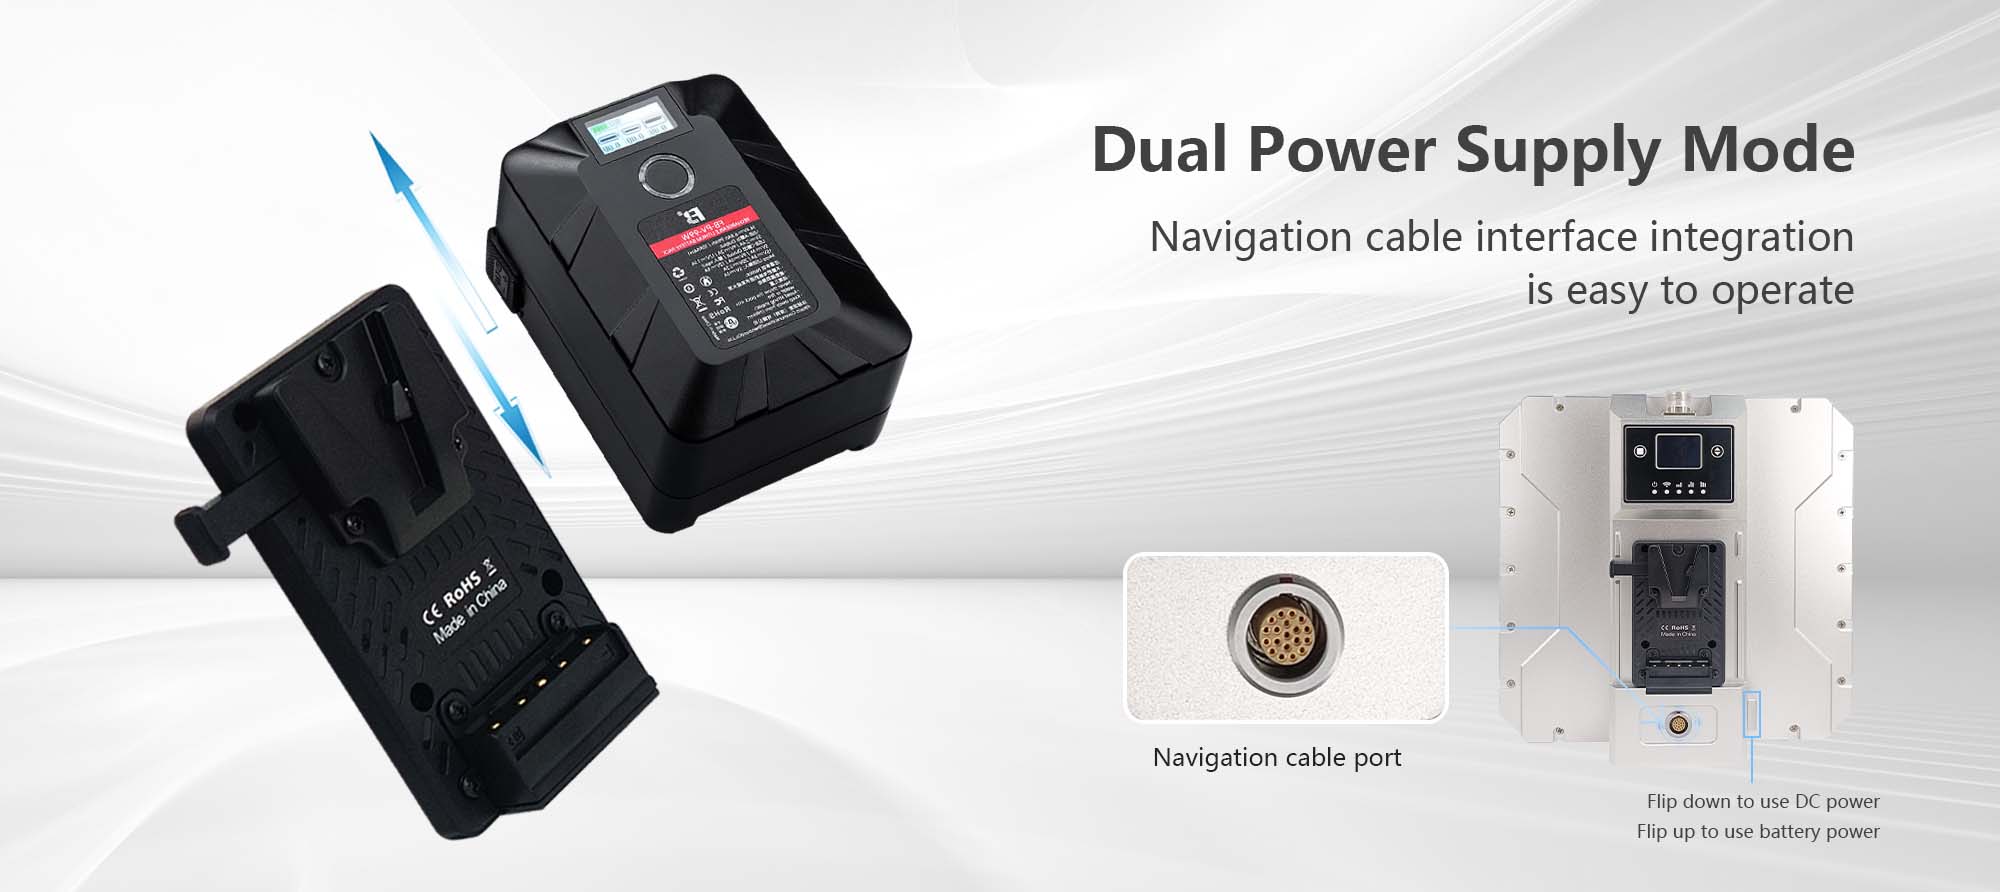 Maestro MK22/MK55, Features dual power supplies: DC/battery and navigation cable integration.